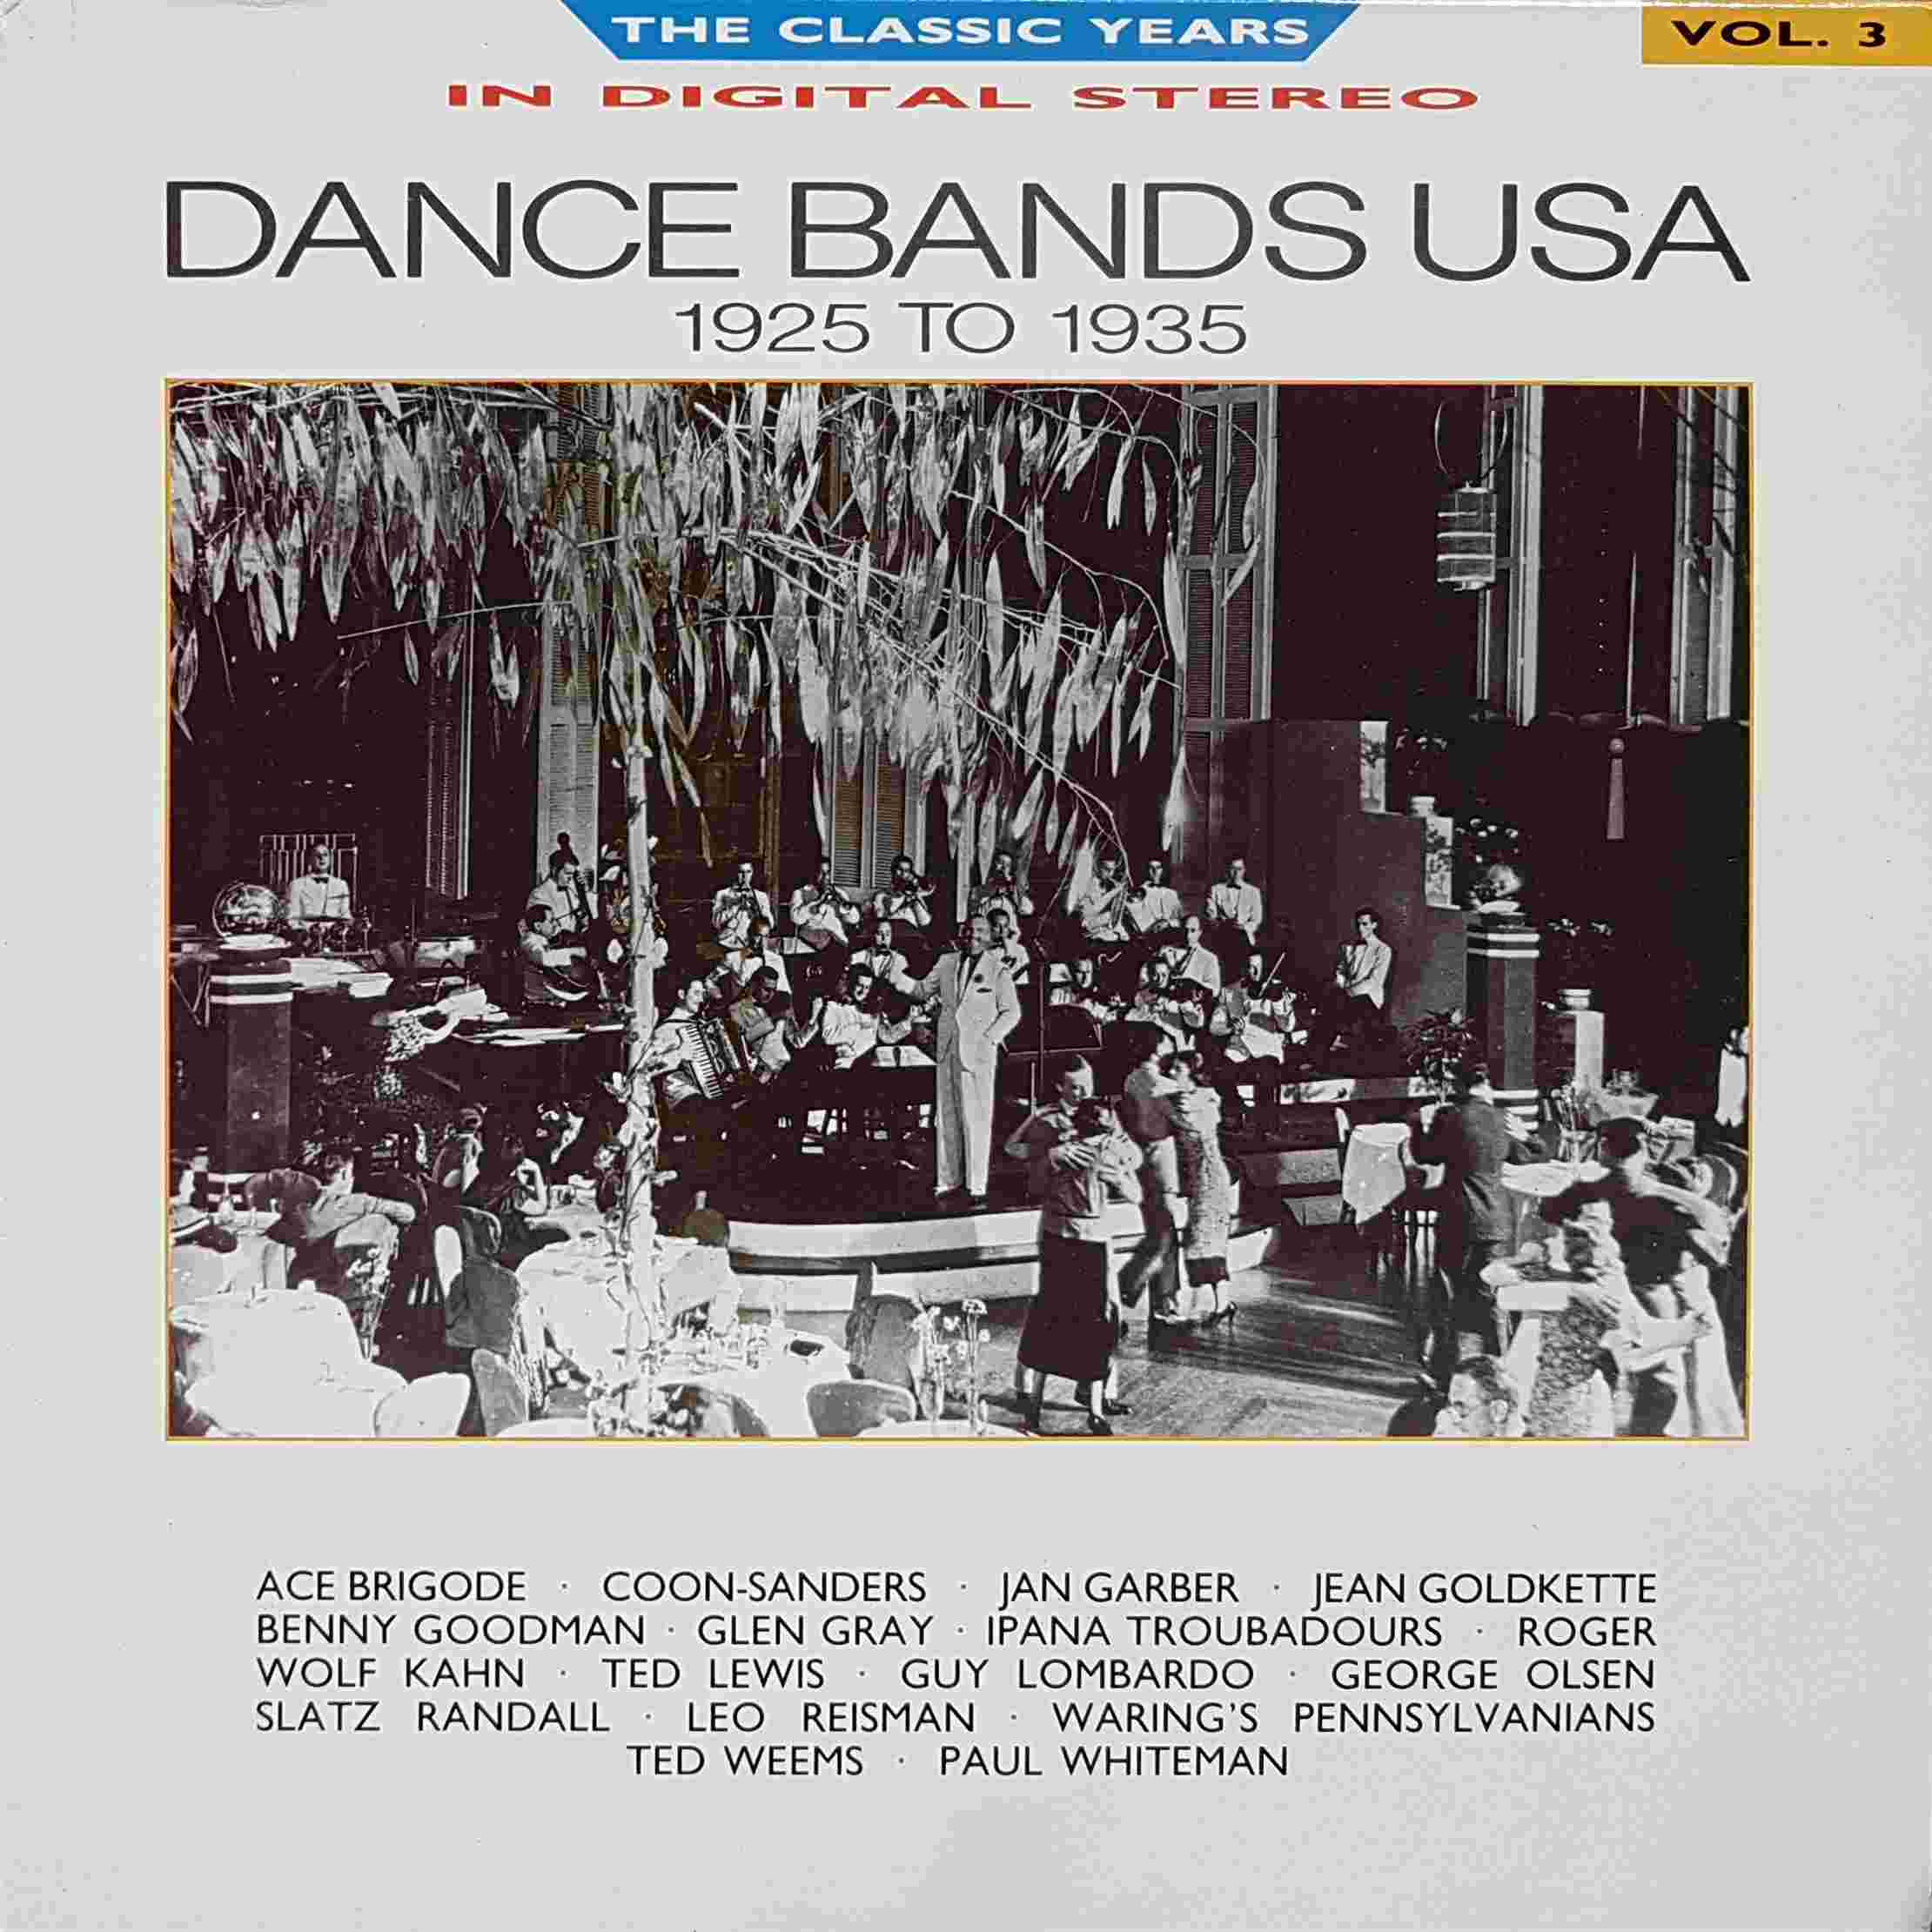 Picture of REB 650 Classic years - Volume 3, Dance bands USA by artist Various from the BBC albums - Records and Tapes library